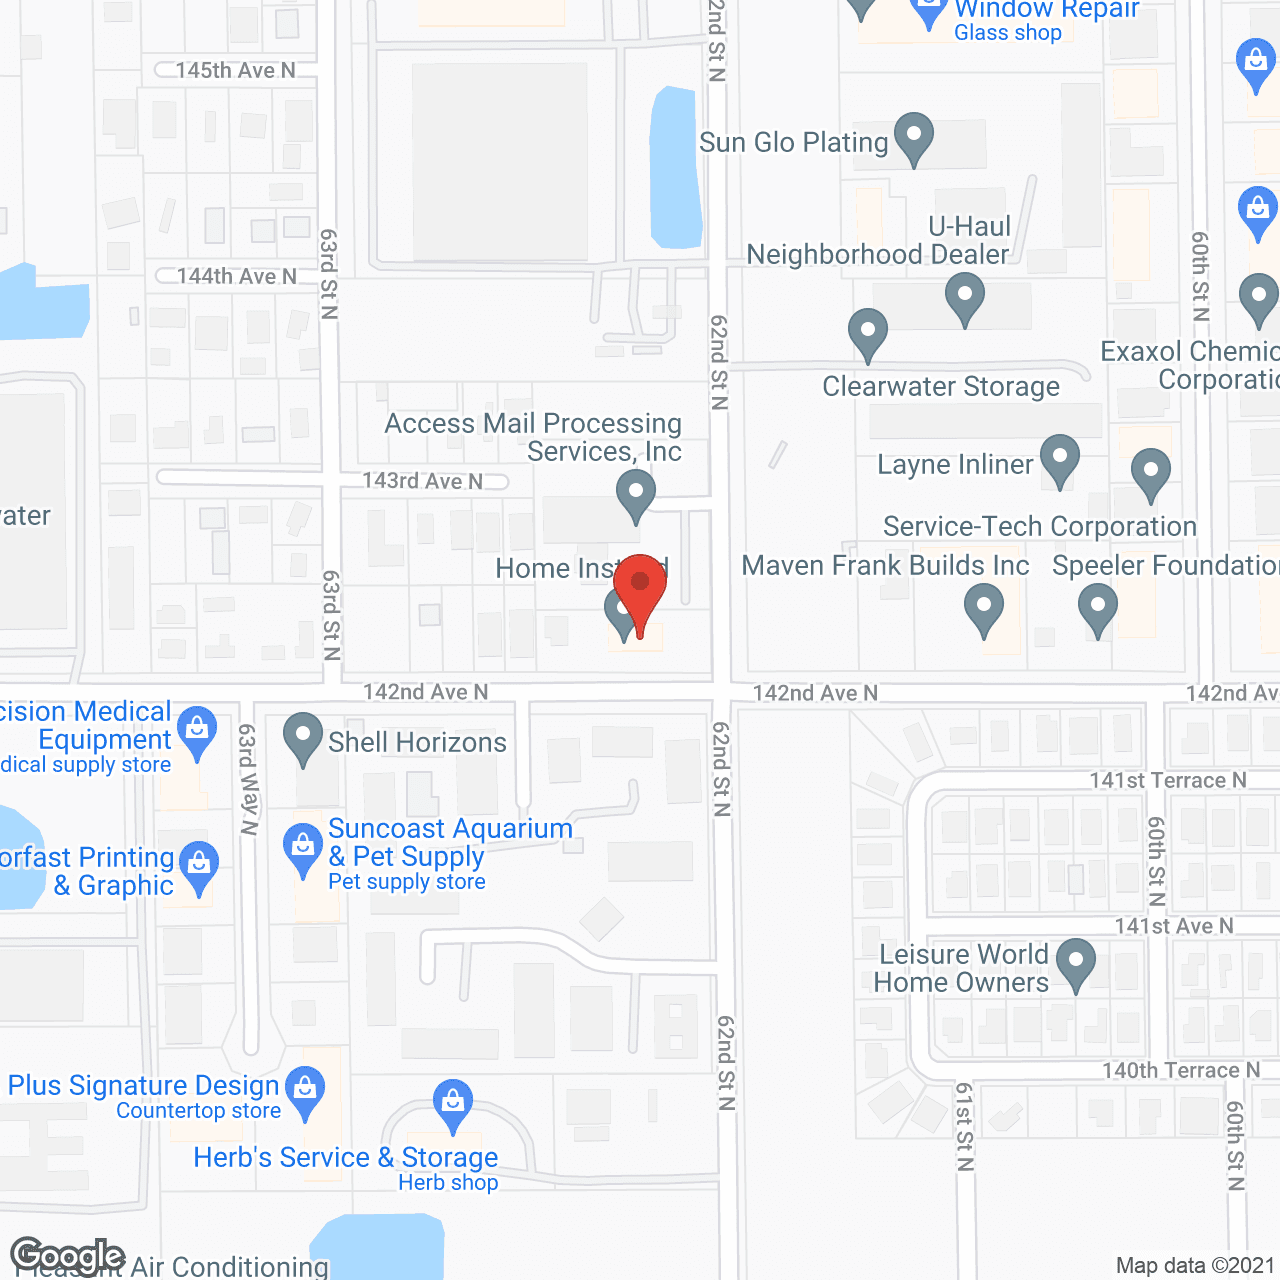 Home Instead - Pinellas County, FL in google map